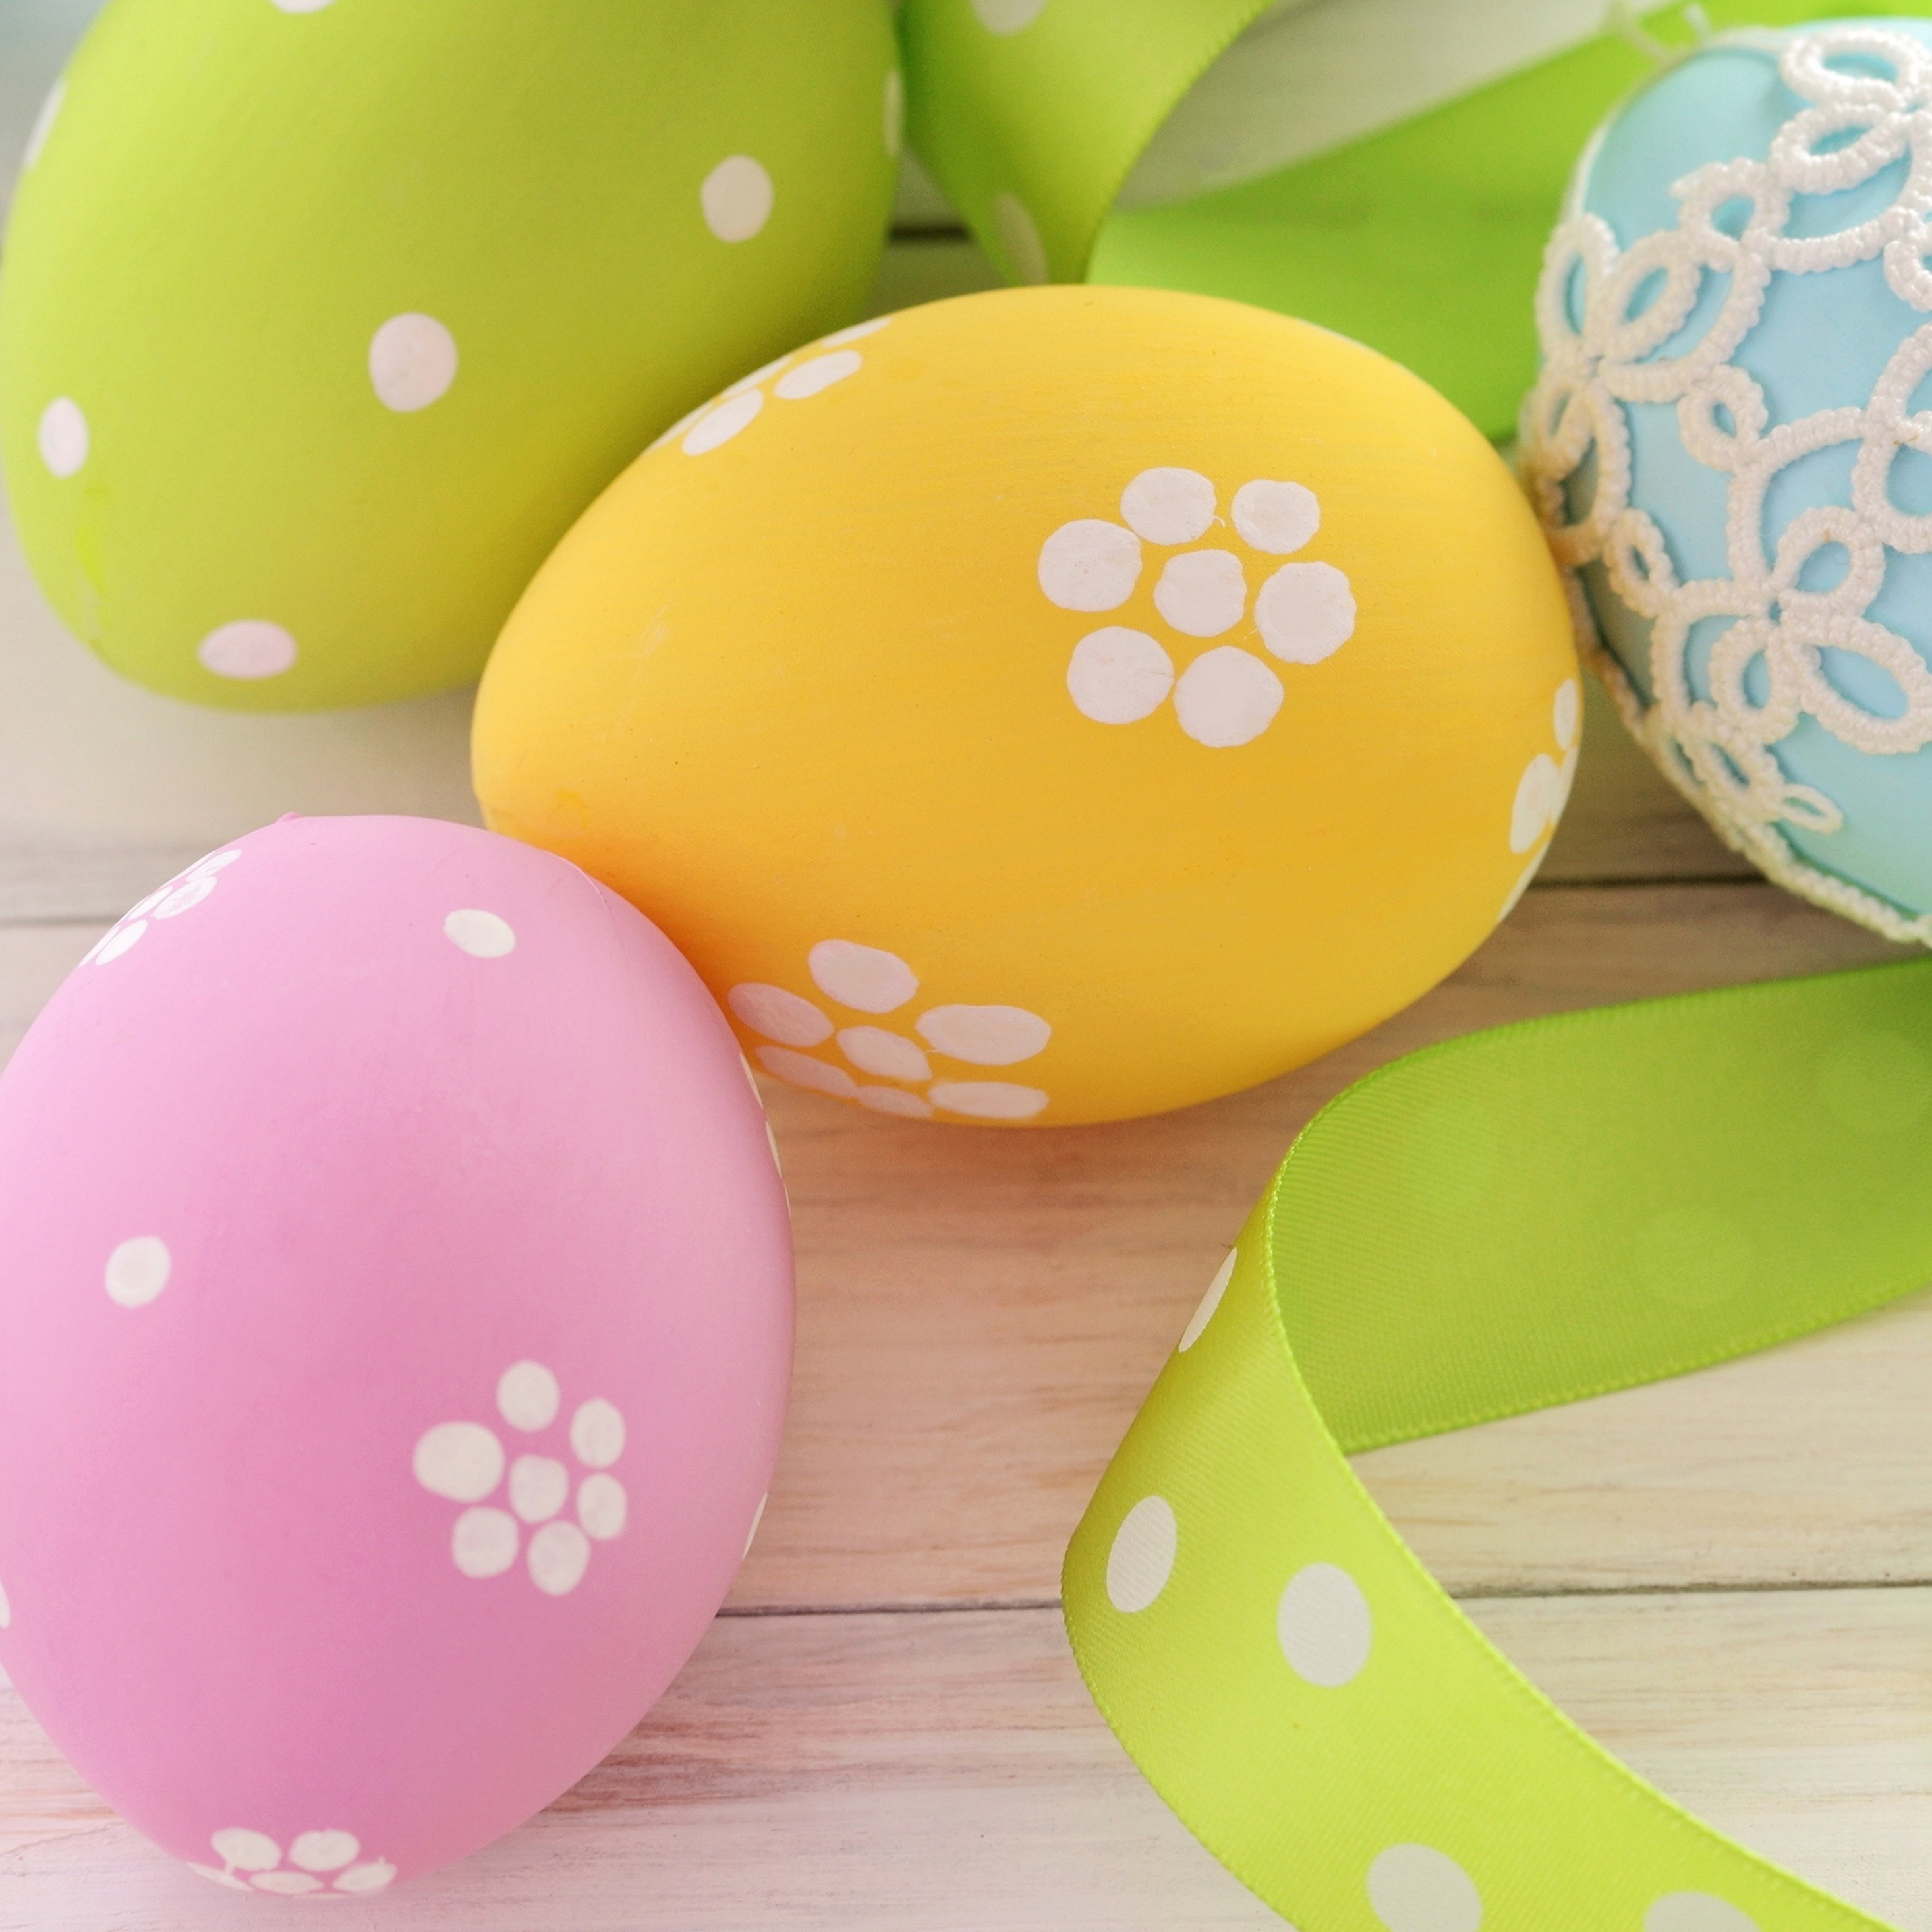 Easter Eggs iPad Pro Retina Display HD 4k Wallpaper, Image, Background, Photo and Picture